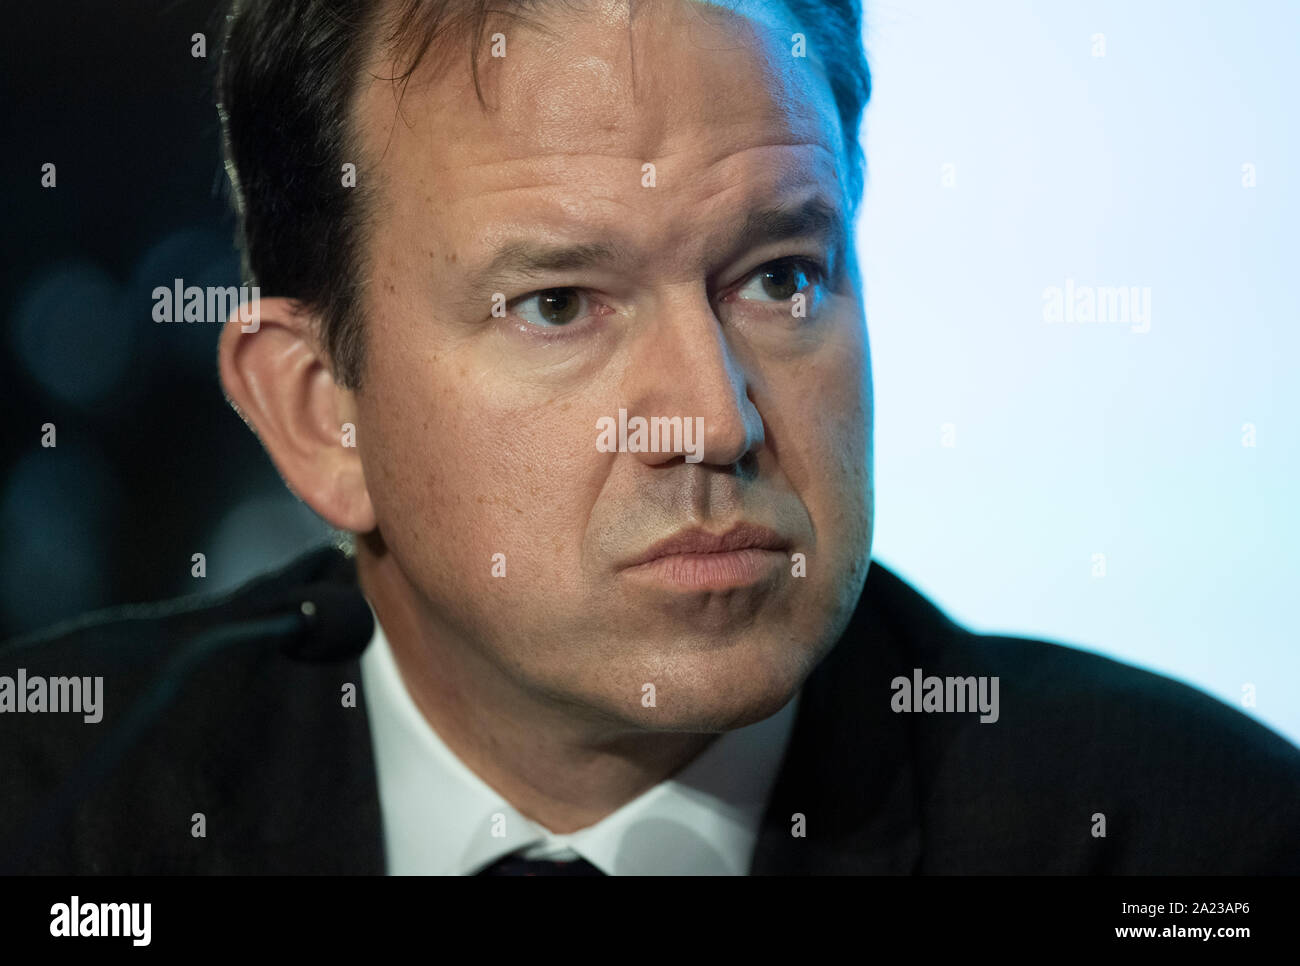 Manchester, UK. 30th Sep, 2019. Jesse Norman, MP for Hereford and South Herefordshire speaks at the Spectator and Centre for Competitive Advantage in the Global Economy (CAGE) fringe event 'Increase revenue, not taxes: how it's done' during day two of the Conservative Party Conference in Manchester. Credit: Russell Hart/Alamy Live News Stock Photo